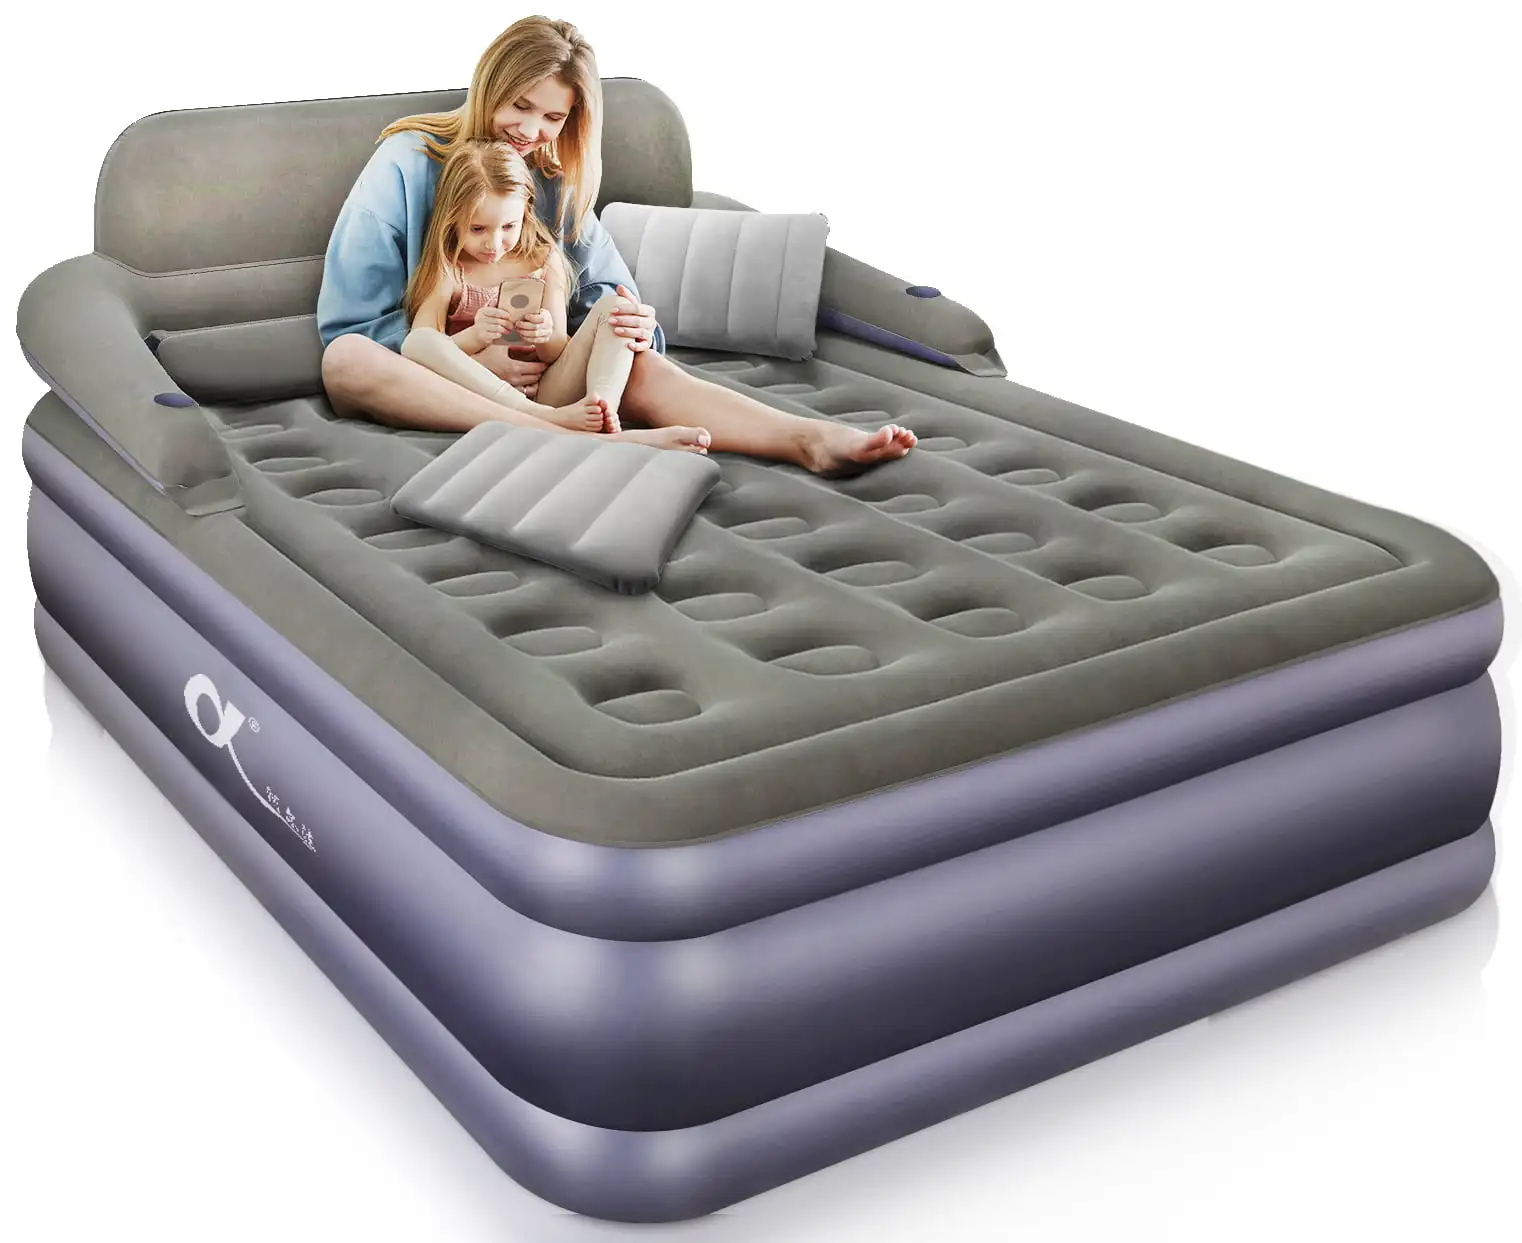 

A-ER-FA Queen Size Air Mattress with Headboard , Quick Inflation/Deflation Inflatable Airbed , 20 Inches High Blow Up Bed with